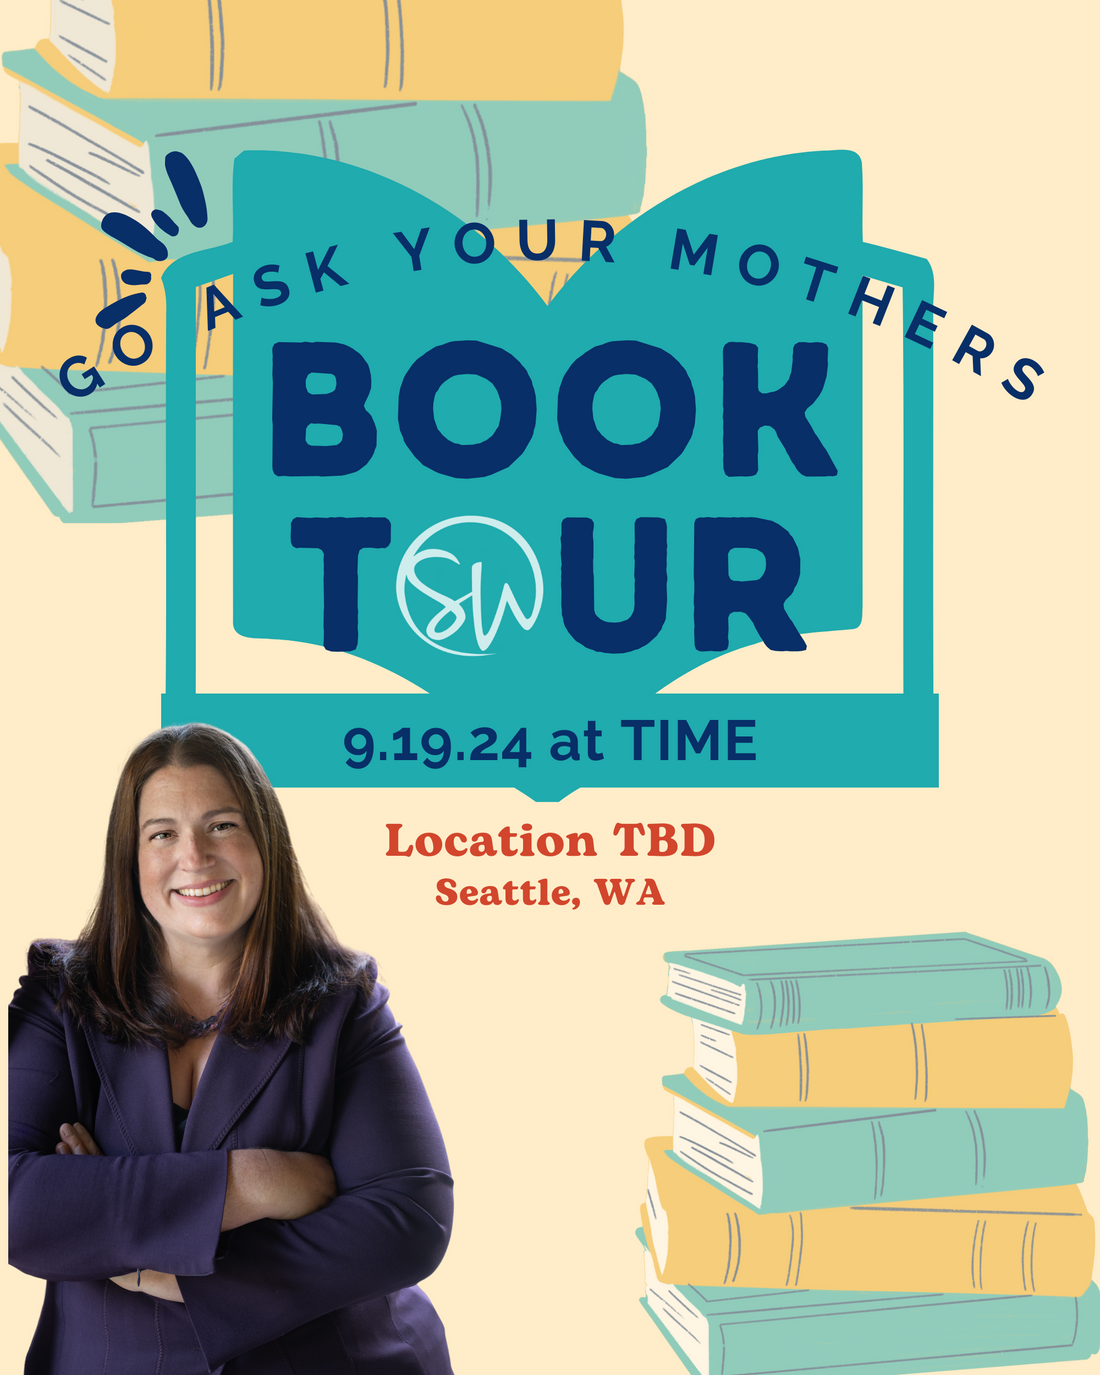 Go Ask Your Mothers w/Sarah Wells - Book Tour 2024 - Seattle, WA - FREE Ticket